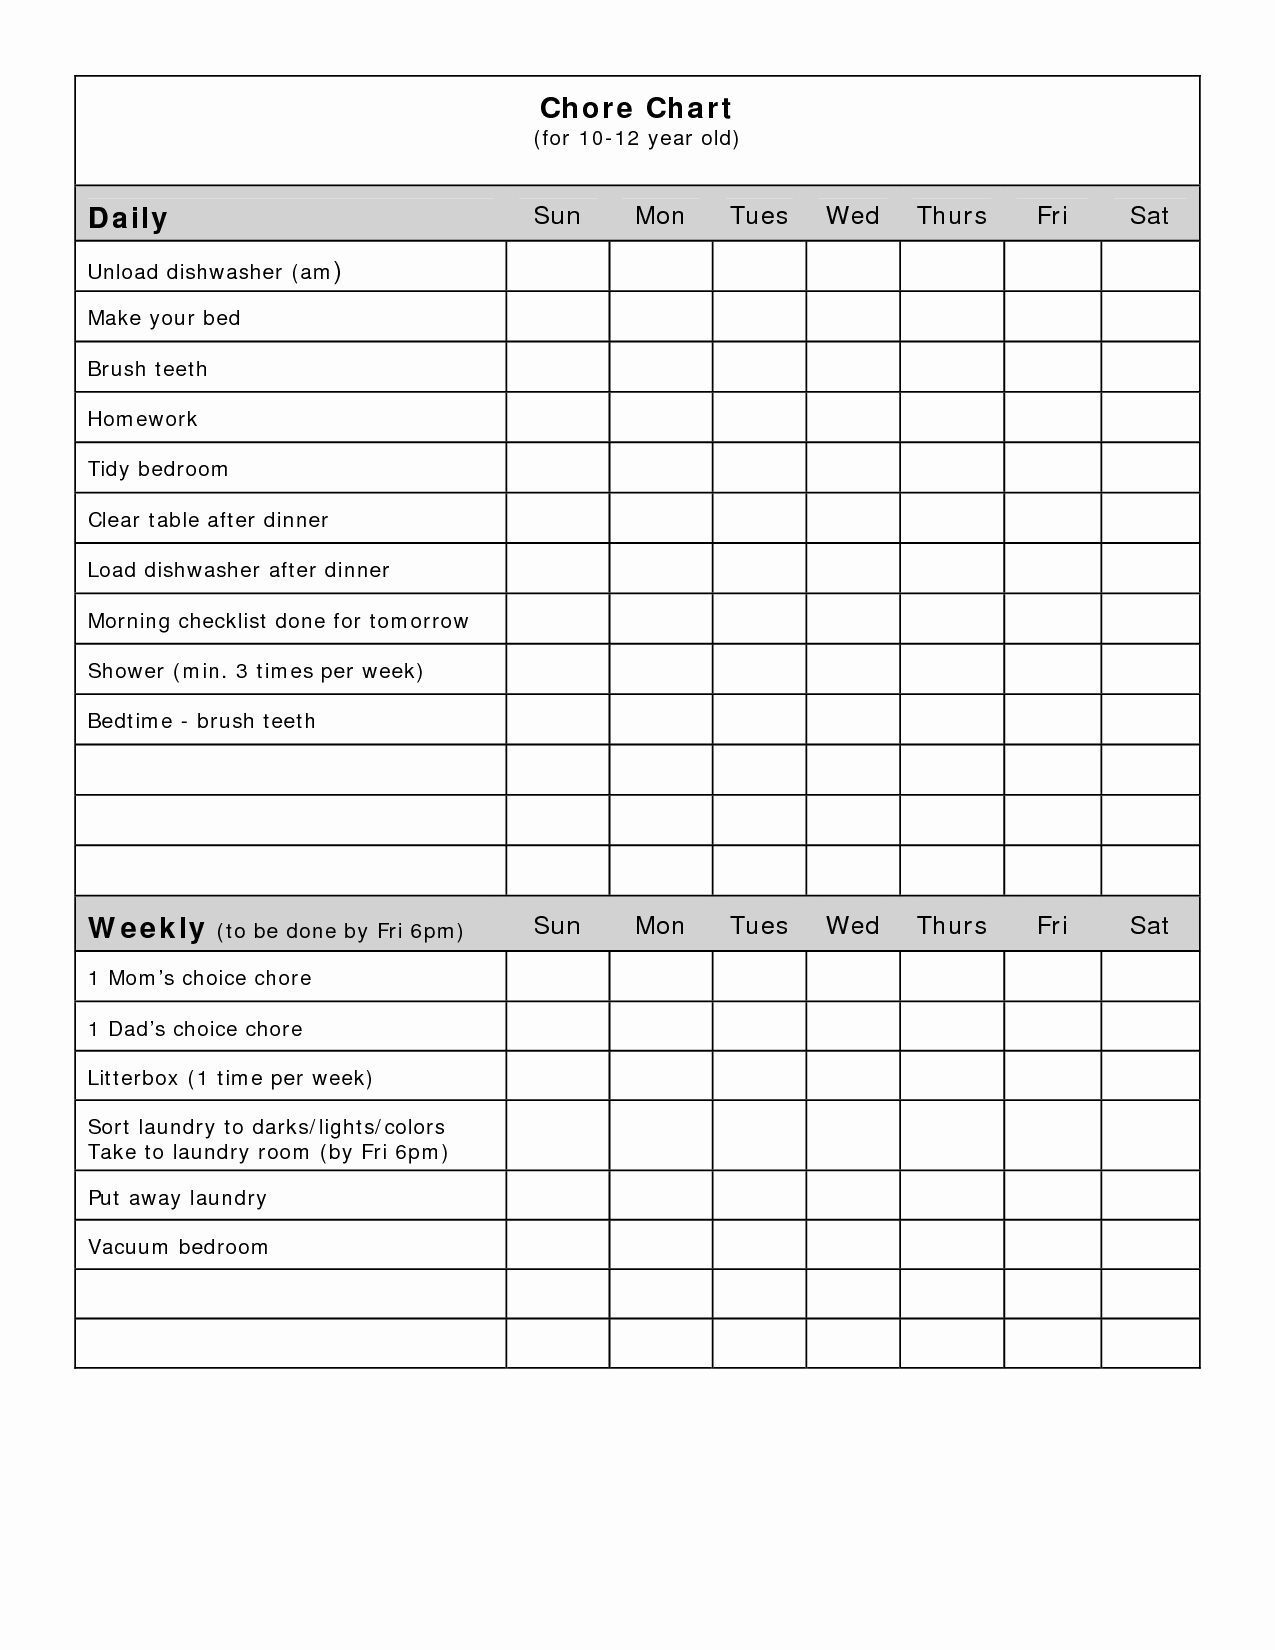 Chore Chart Template Excel Awesome Free Blank Chore Charts Templates